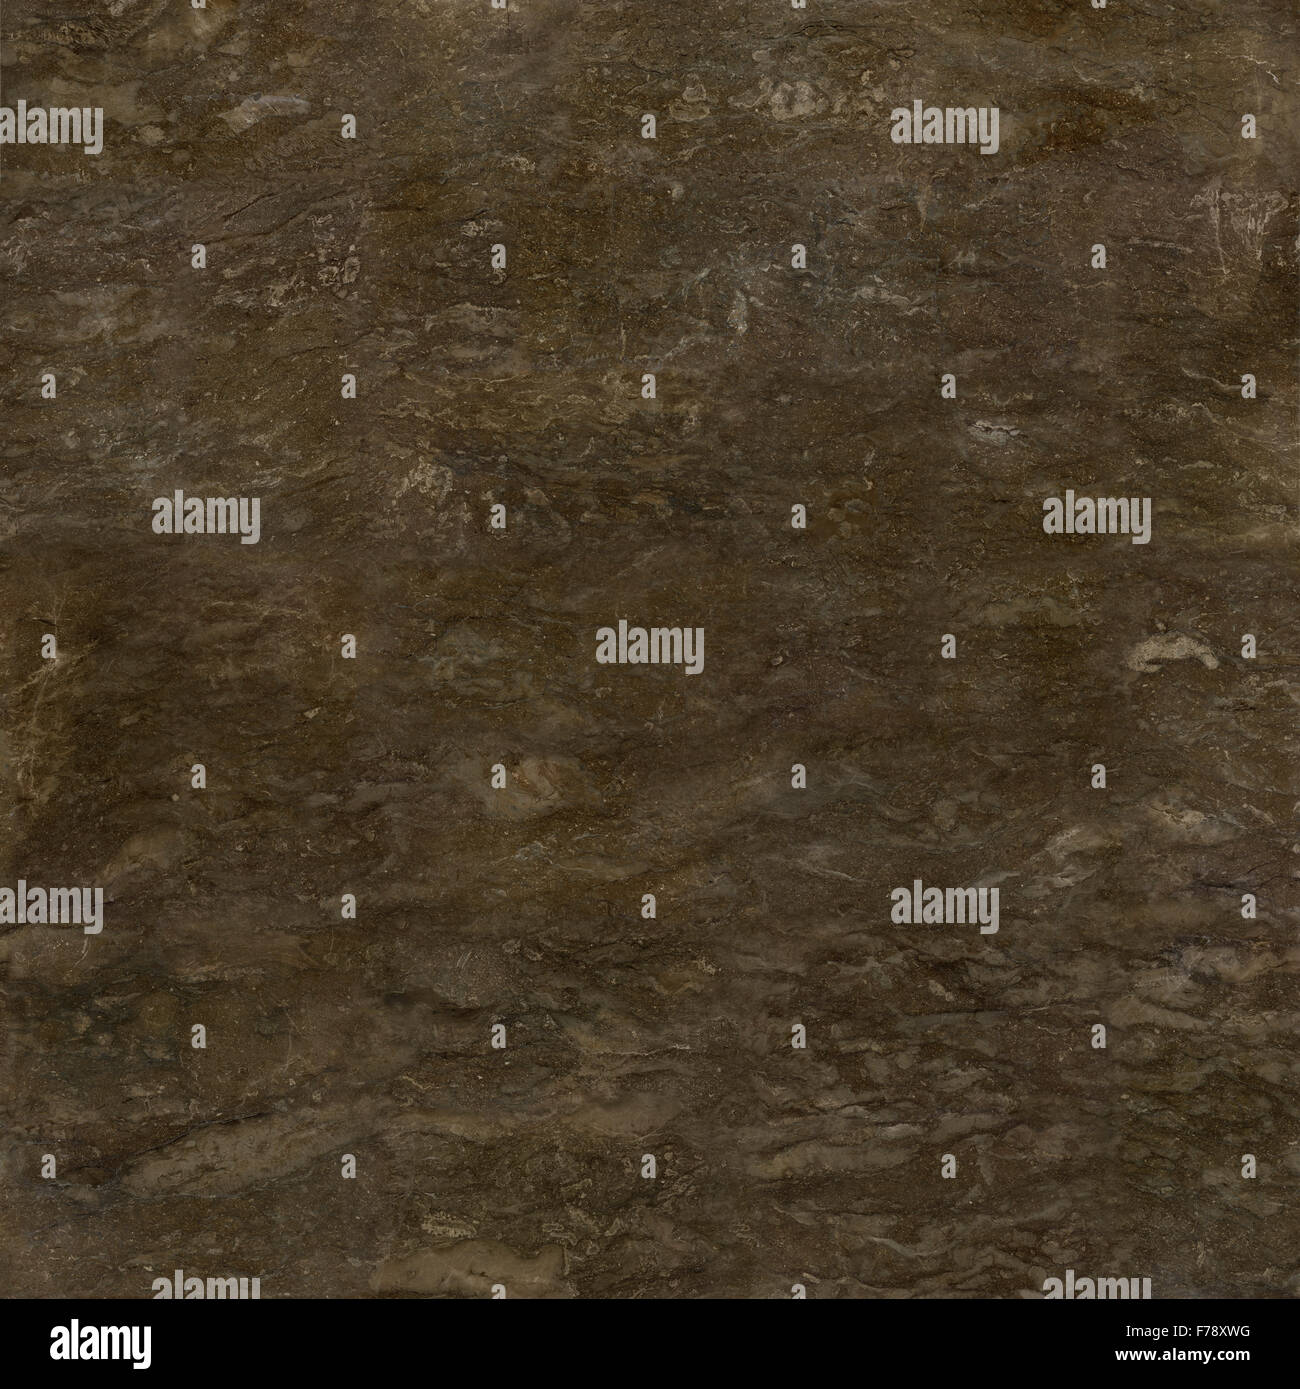 Dark brown marble natural stone texture background. Approximately 6 by 6 foot area. Stock Photo